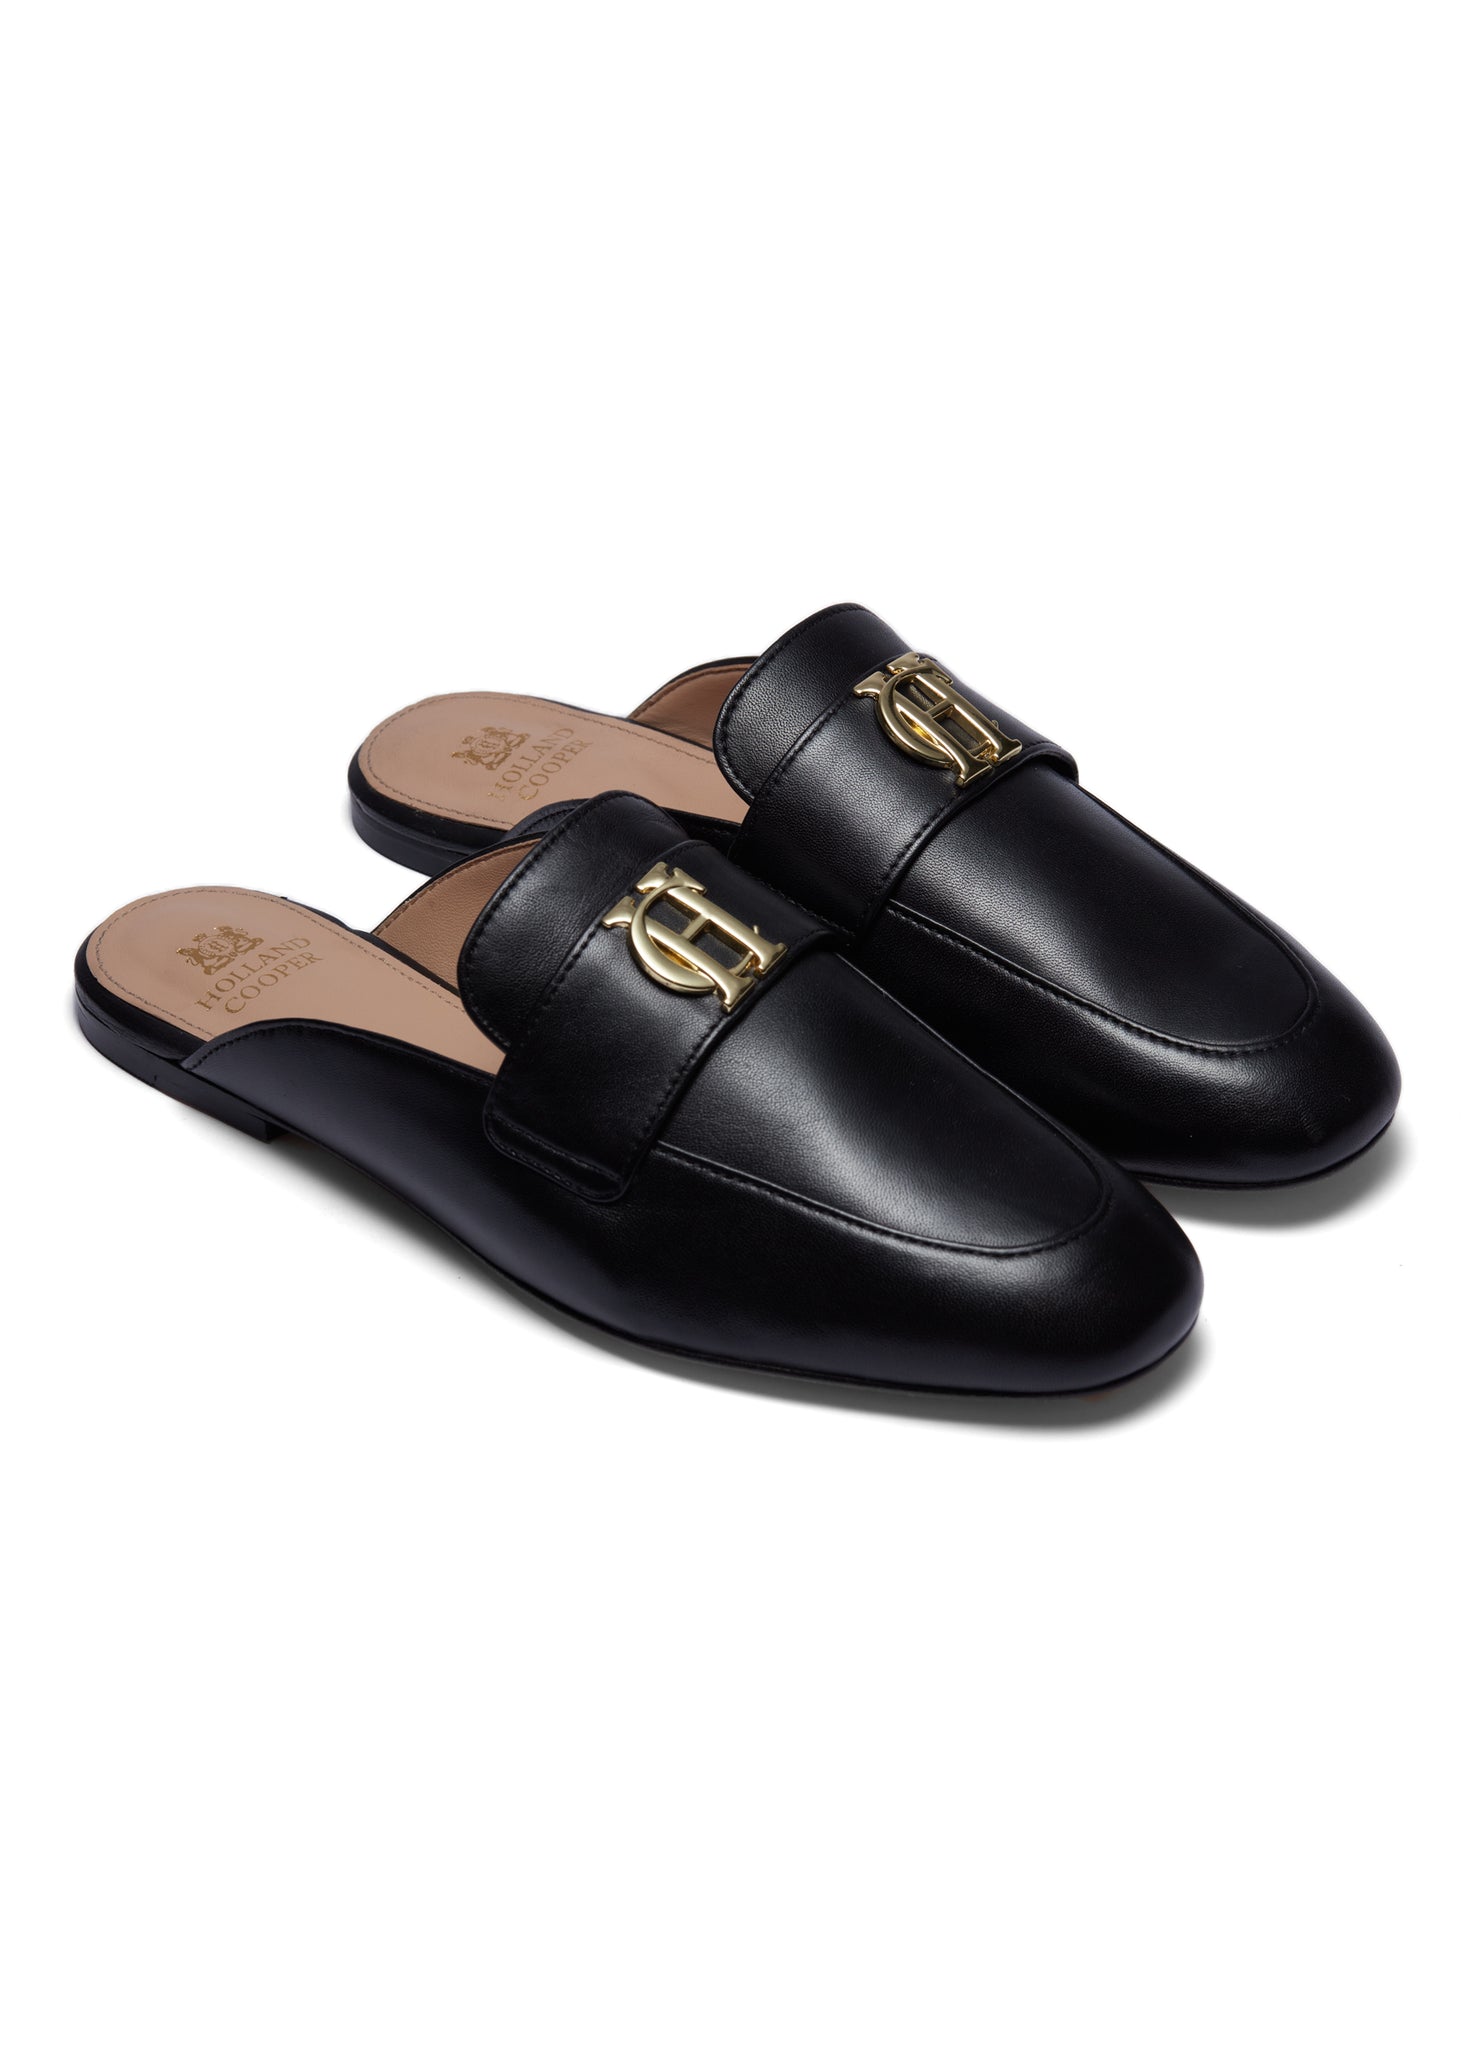 Side view of black leather backless loafers with a slightly pointed toe and gold hardware to the top with gold foil branding to the inner sole